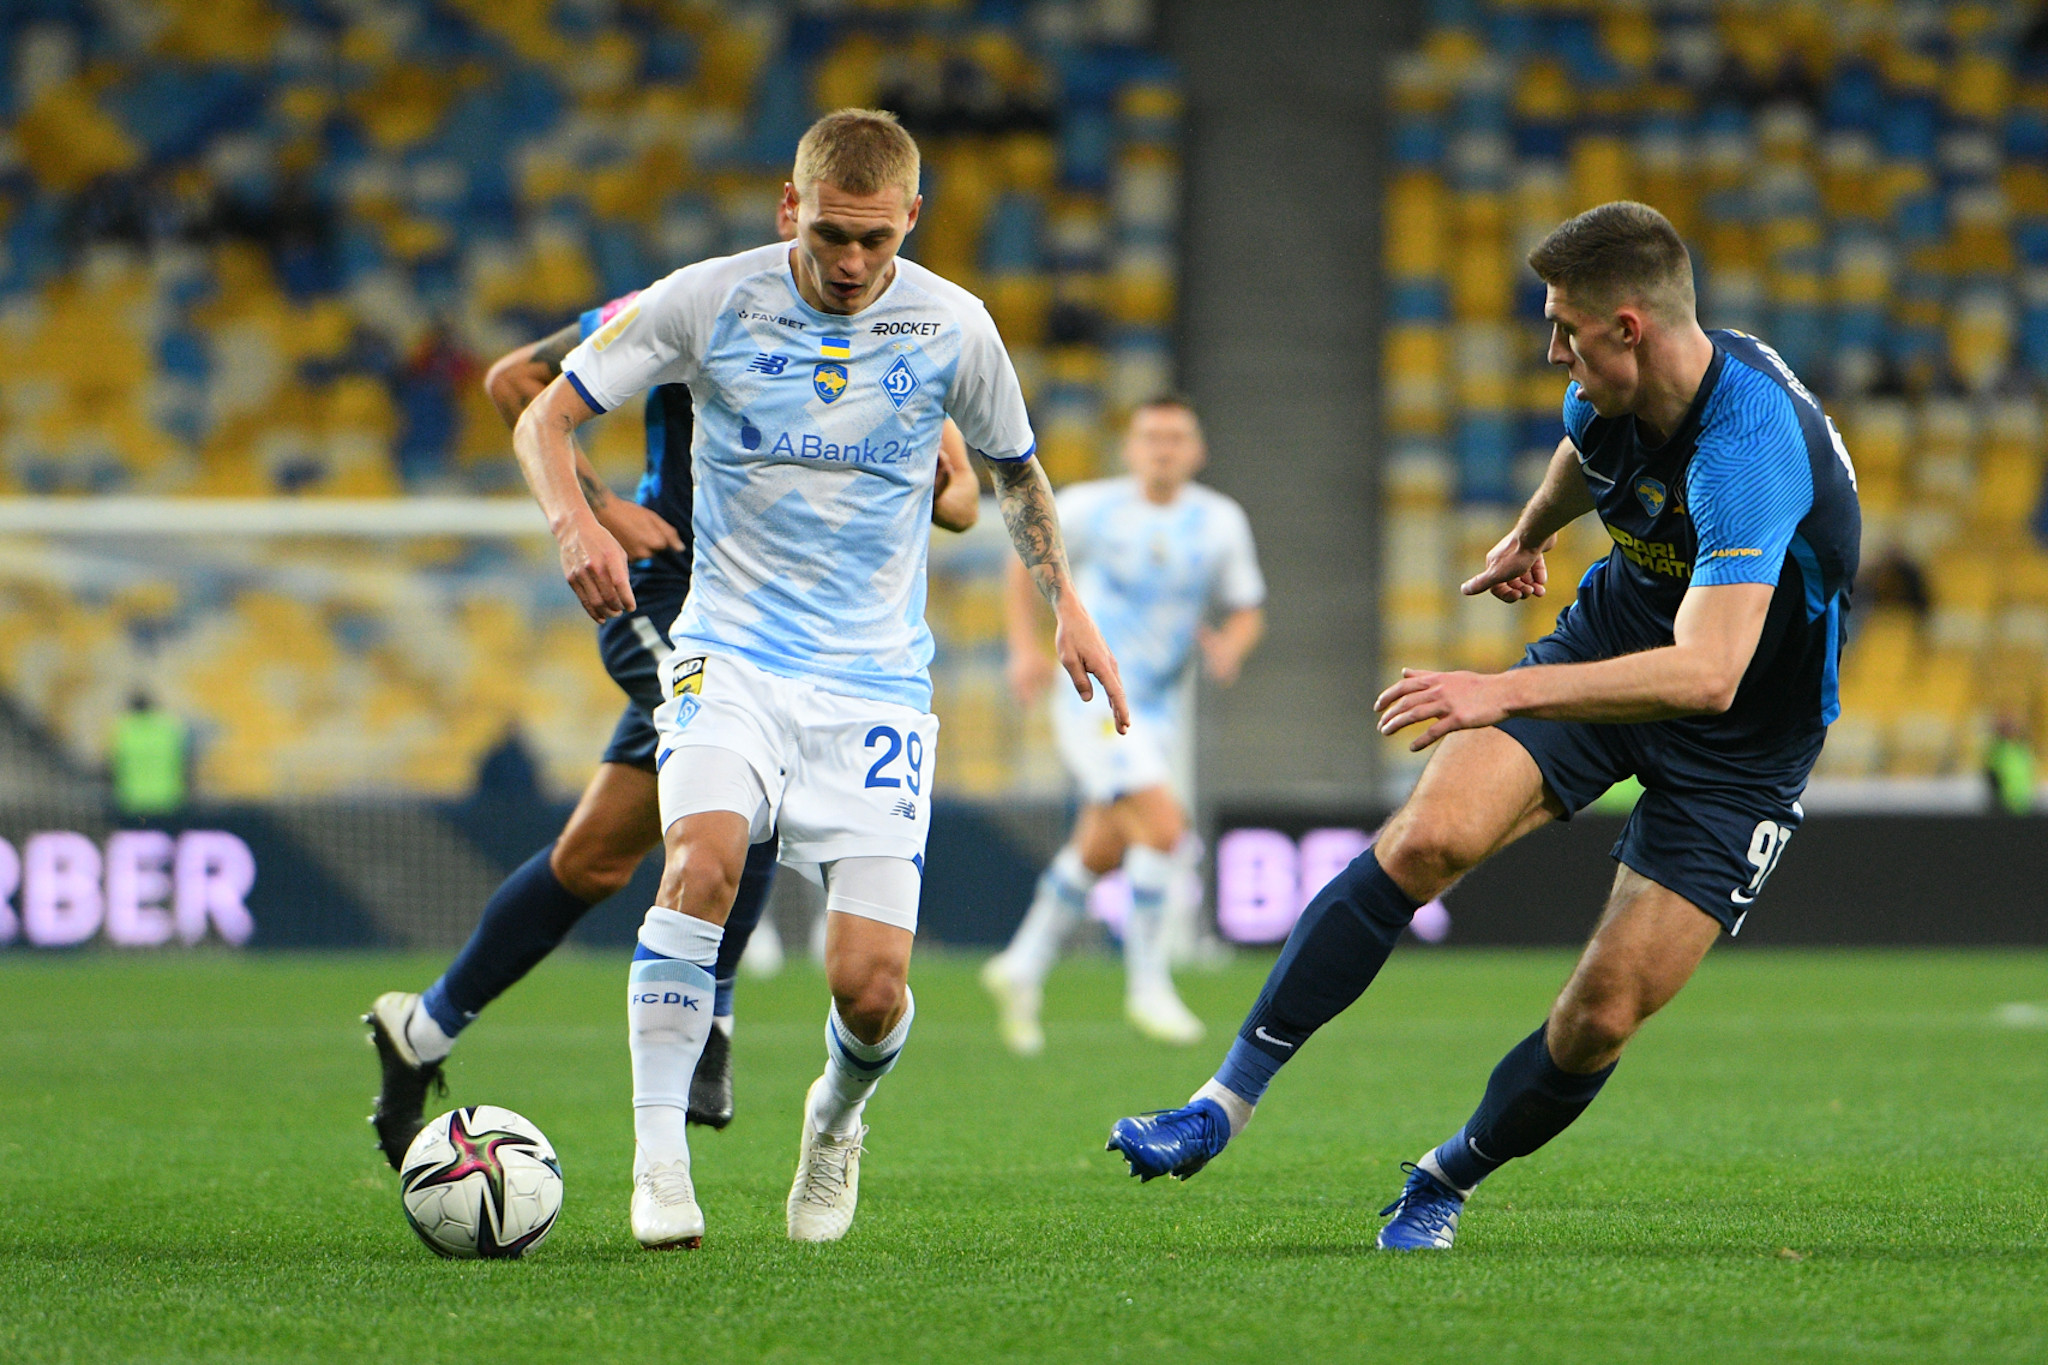 Vitaliy Buialskyi: “We made adjustments and succeeded in the second half”